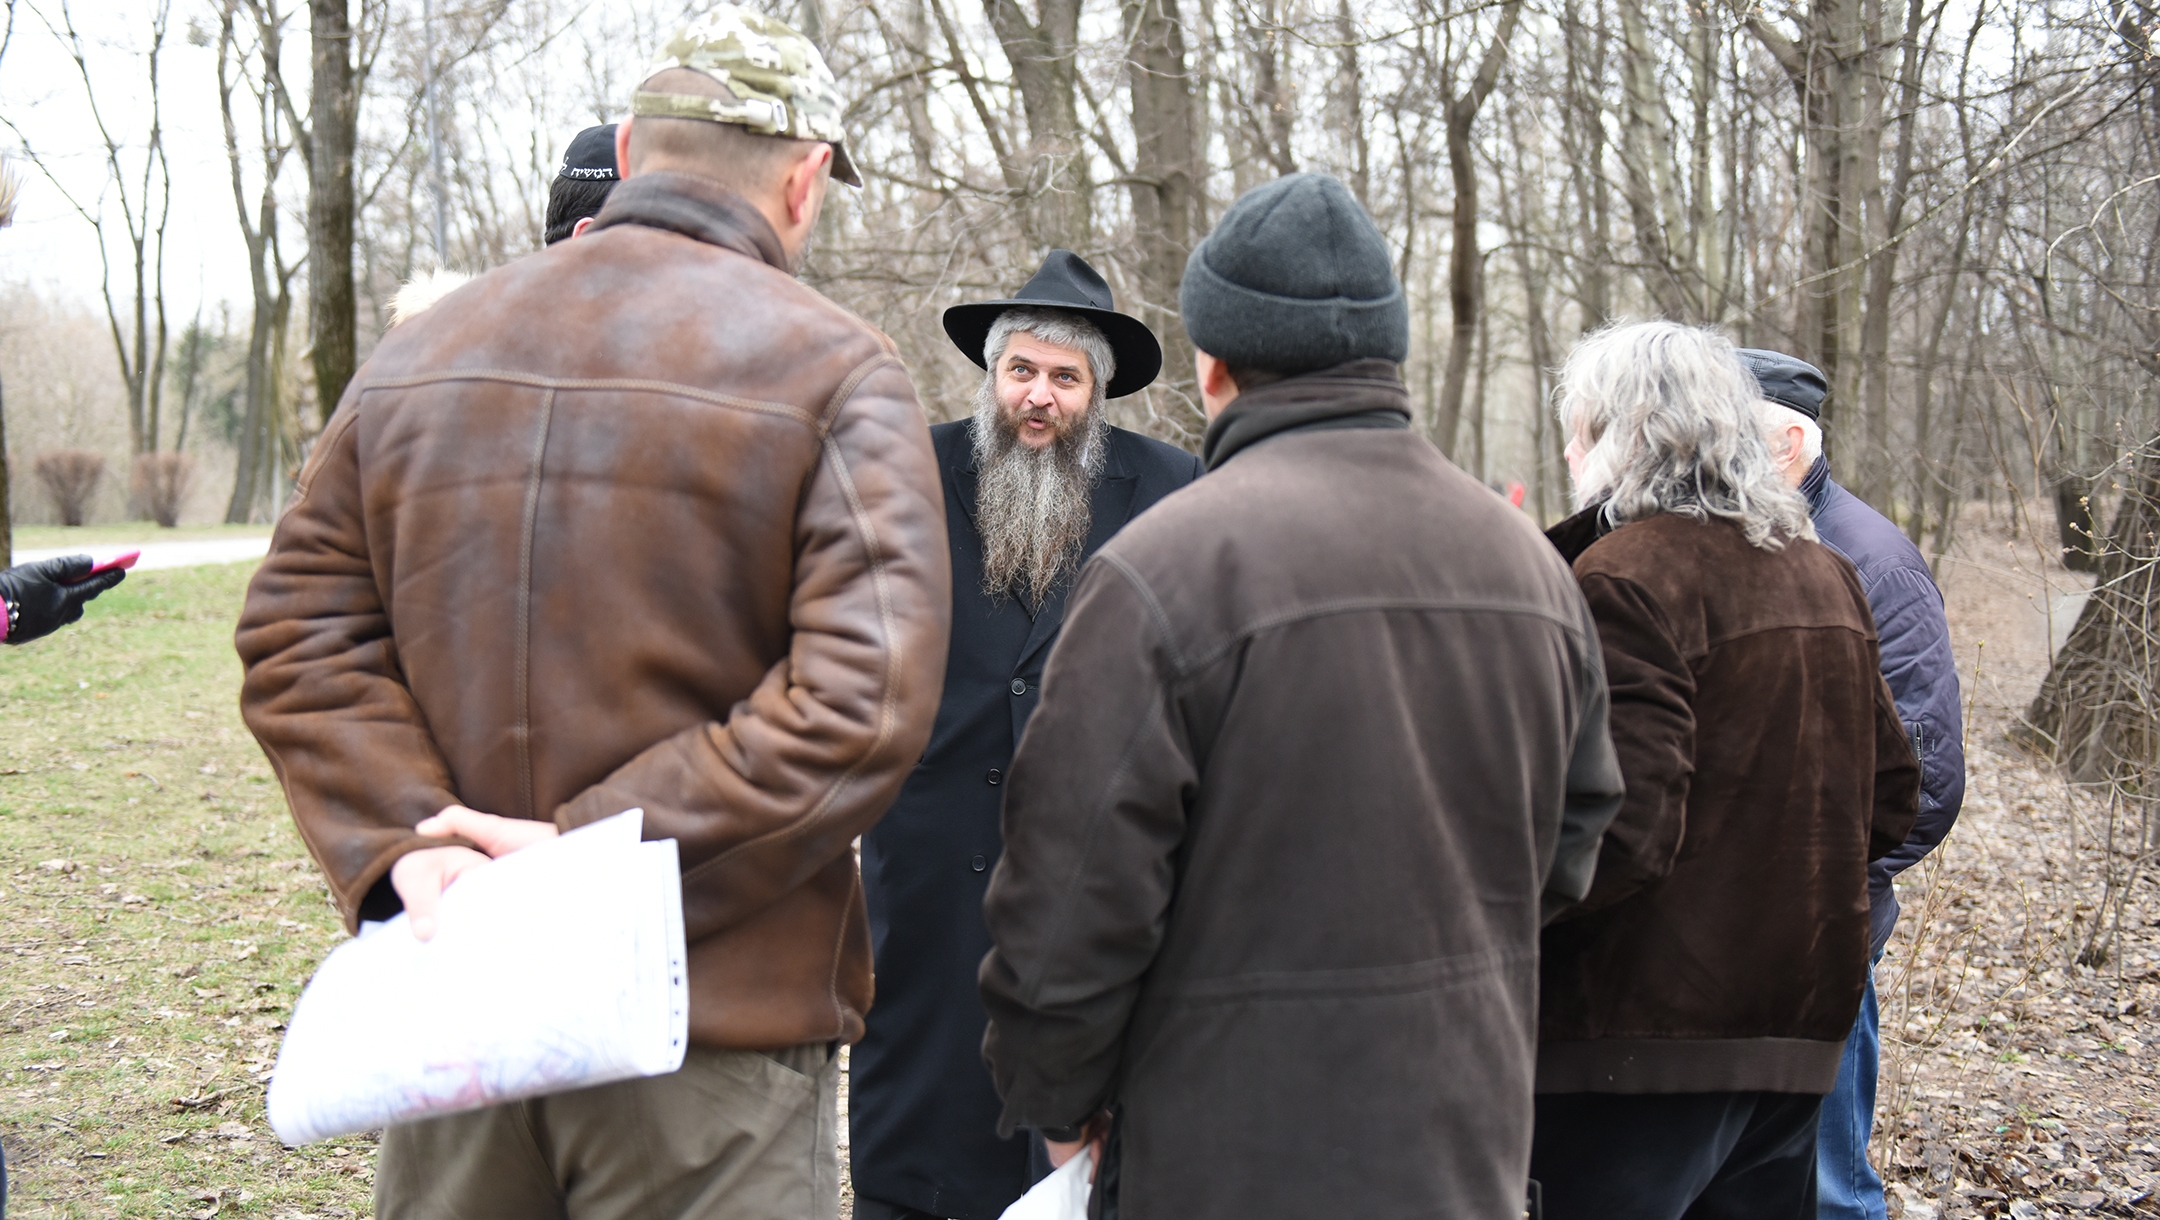 Moshe Azman, a Ukrainian rabbi, discussing with architects the construction of a Holocaust museum near the Babi Yar monument in Kiev, Ukraine on March 14, 2016. (Cnaan Liphshiz)